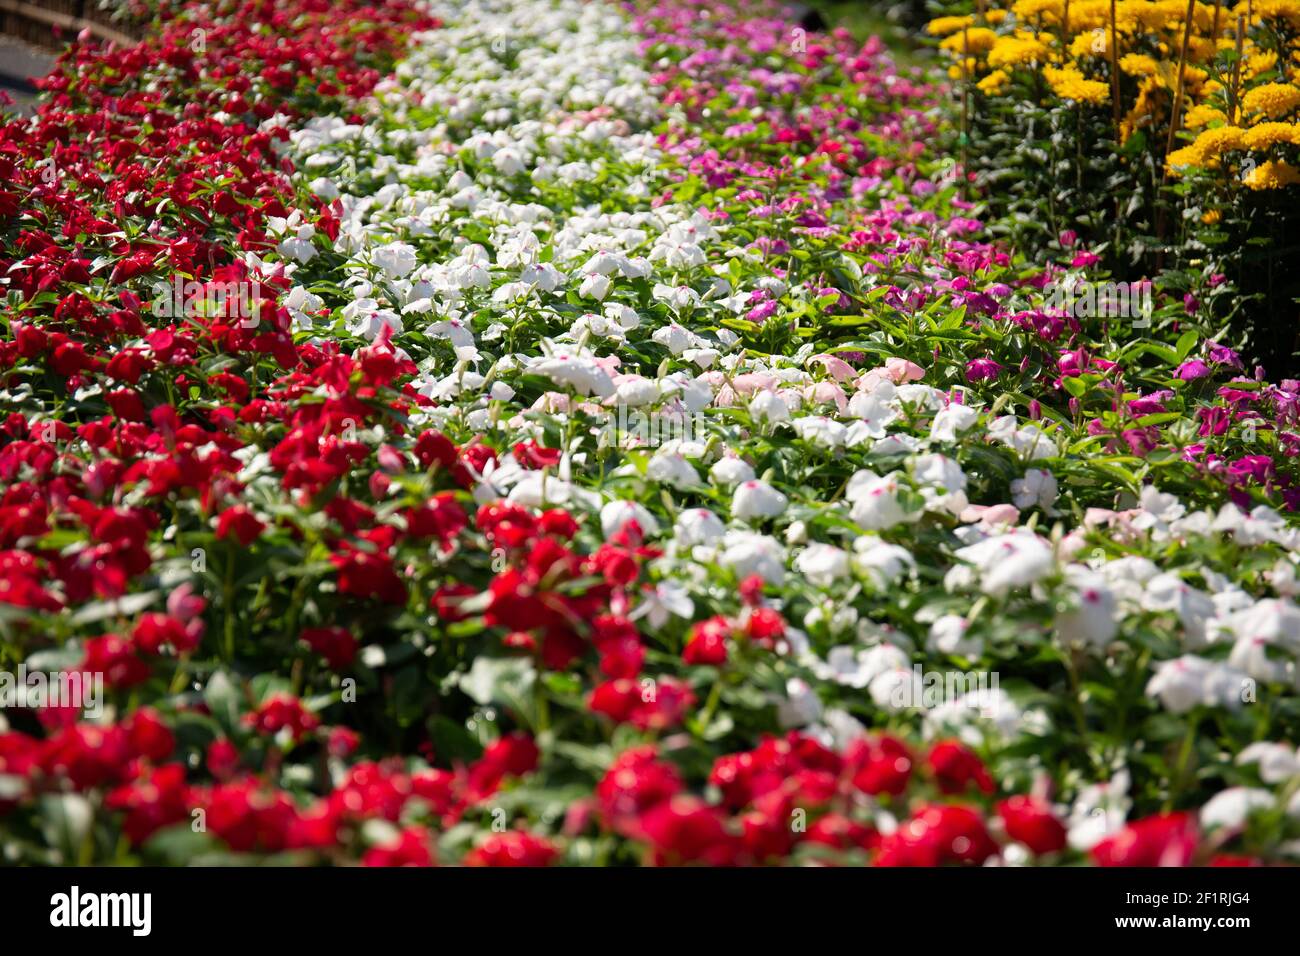 A beautiful view of colorful begonia flowers in a garden Stock Photo